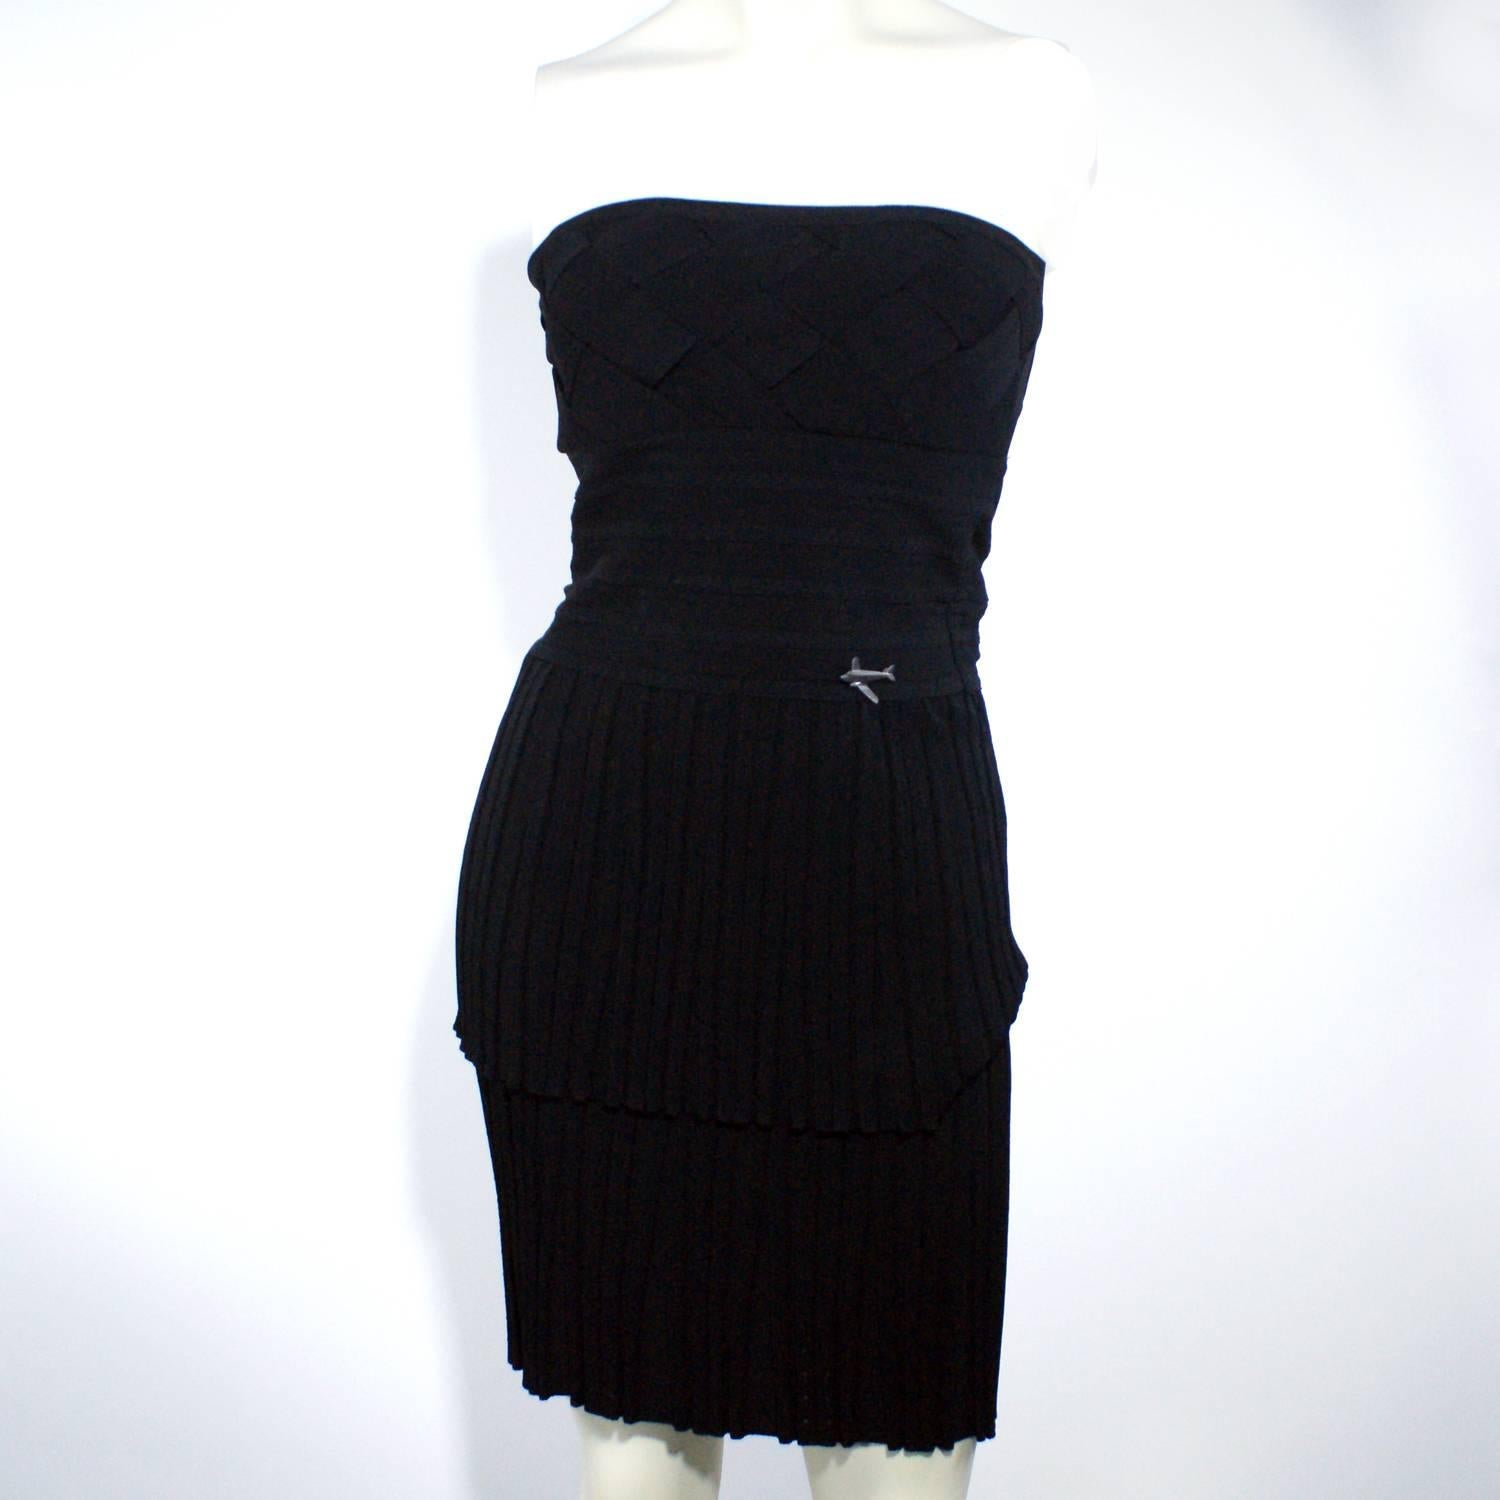 Two piece outift
Tube top with skirt
Airplane logo Chanel pin
Pleated Skirt